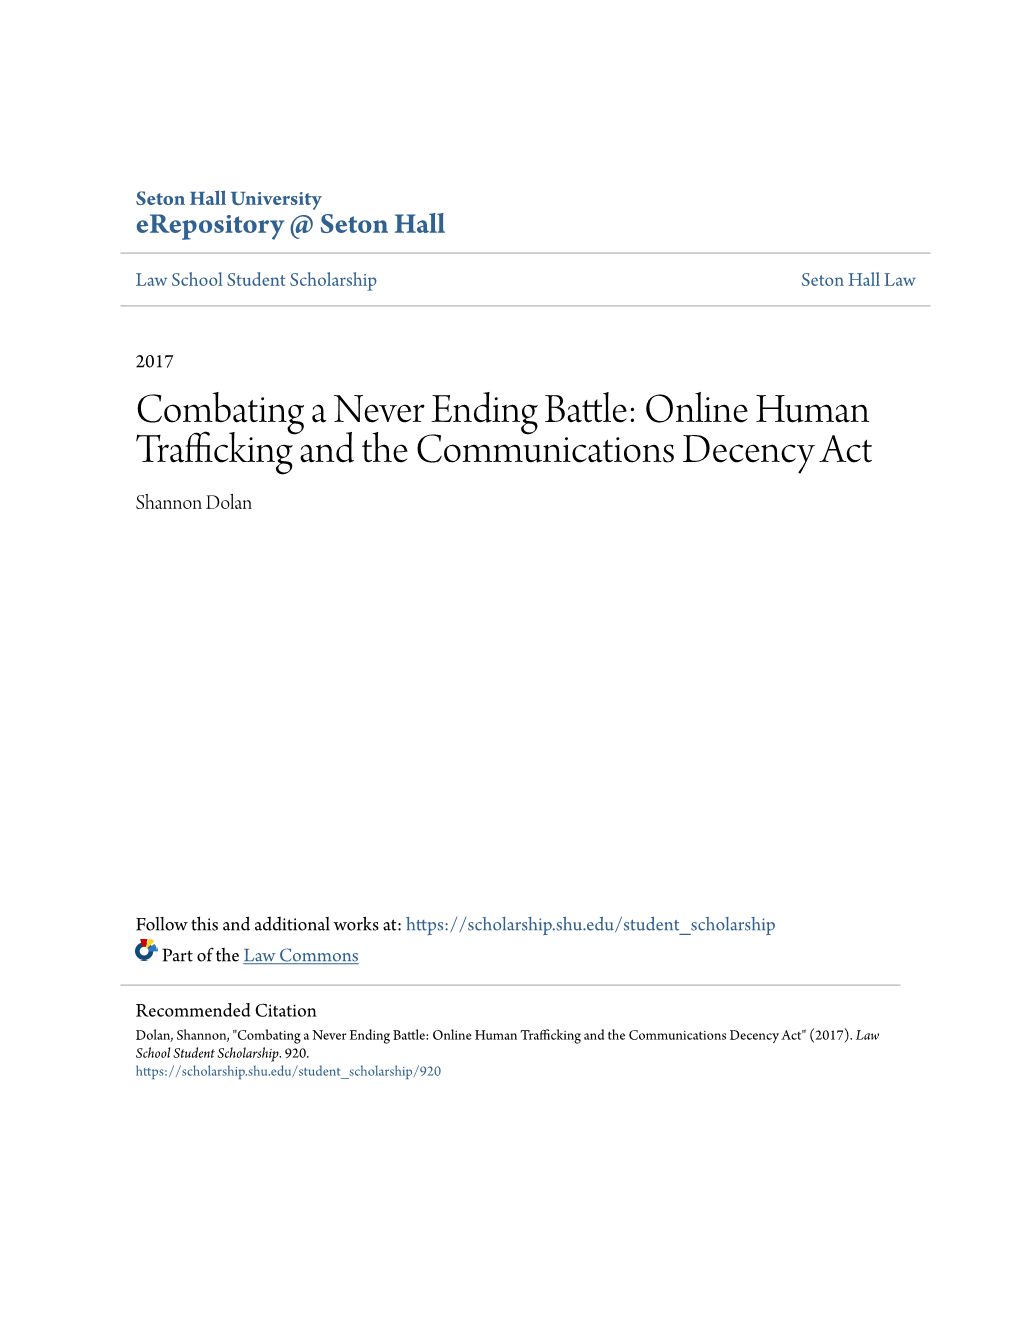 Online Human Trafficking and the Communications Decency Act Shannon Dolan